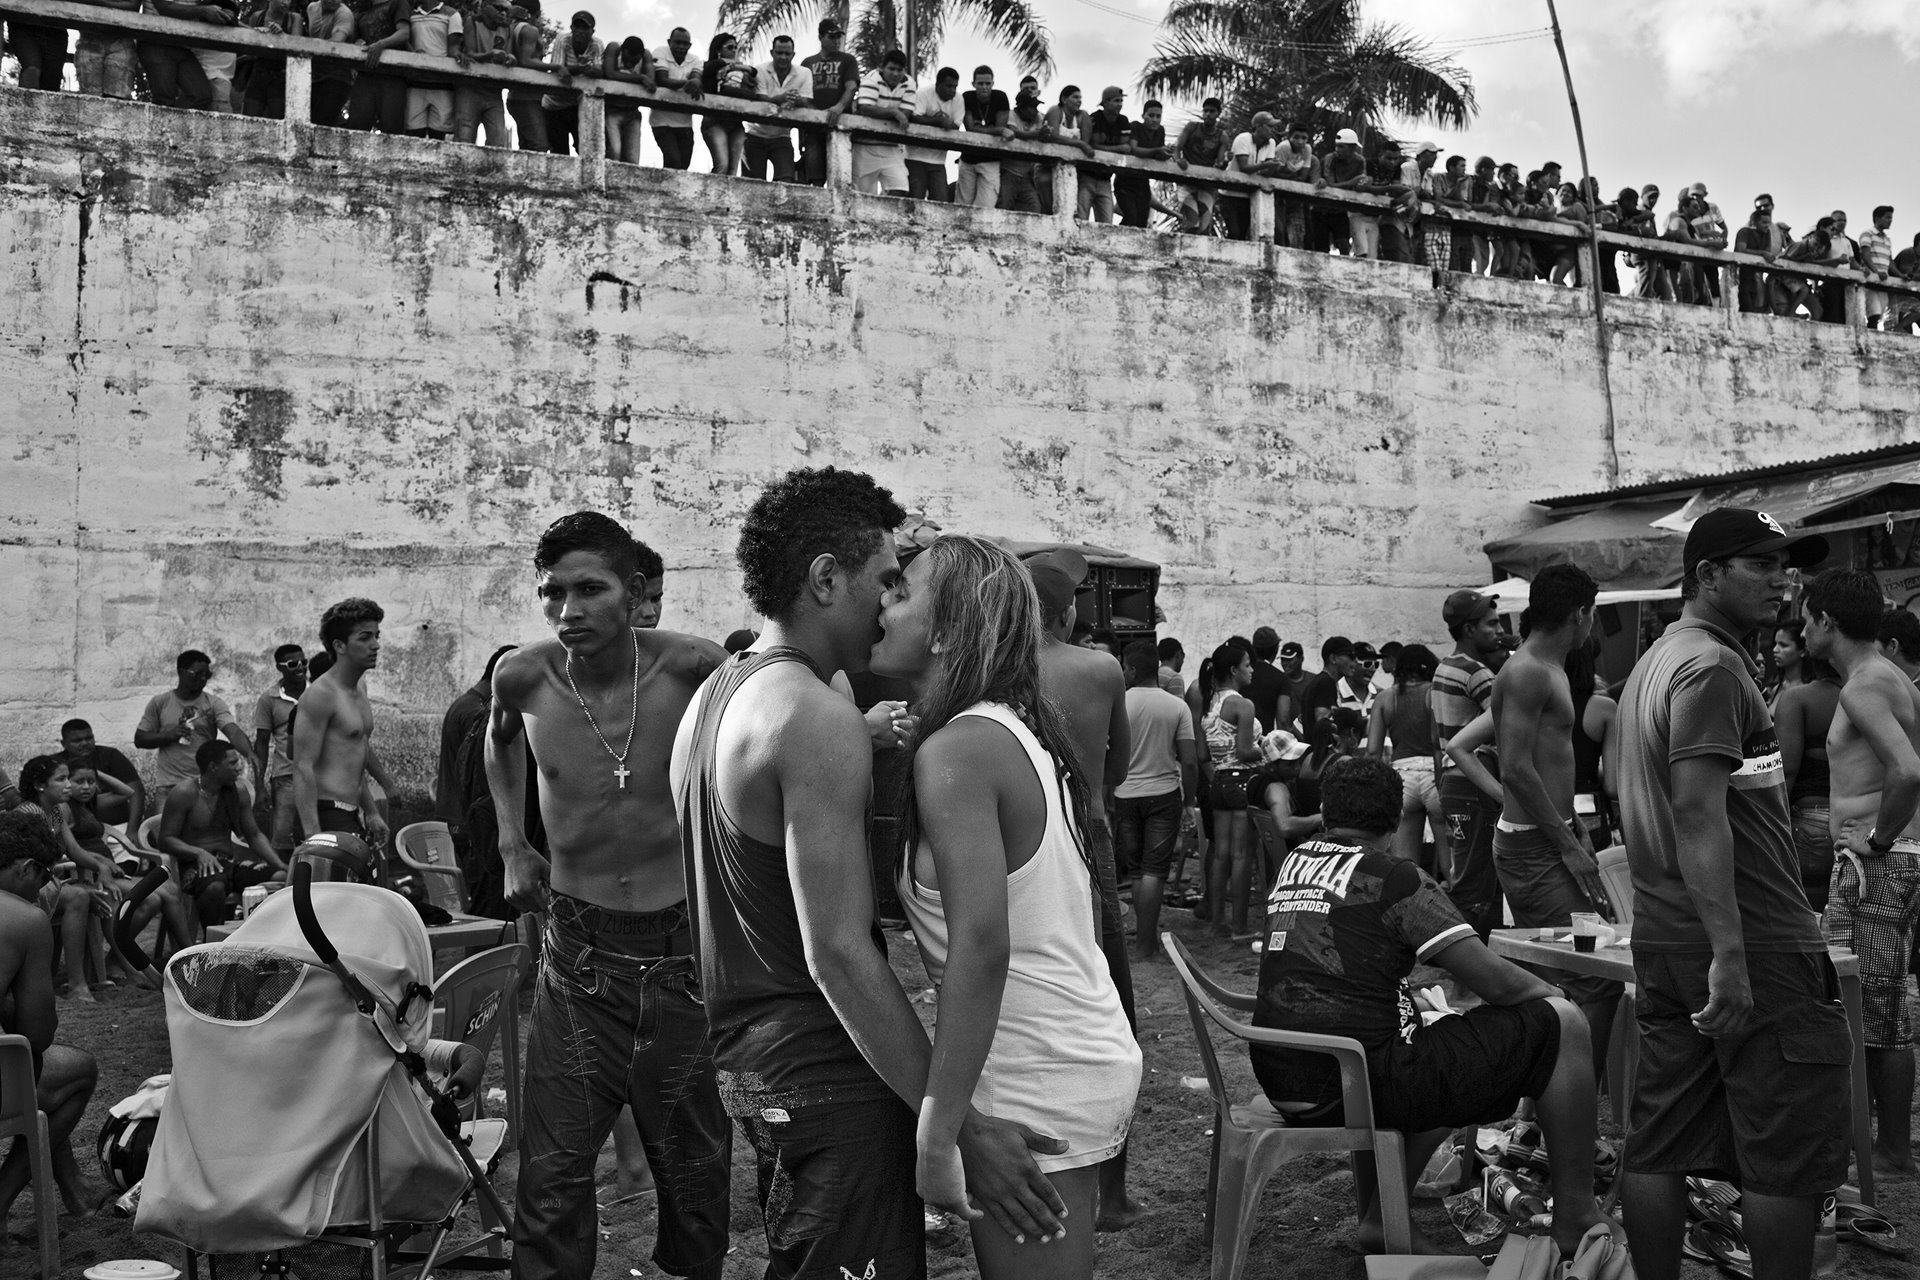 Workers from the Belo Monte Dam construction site party on the Xingu river bank in Altamira, in Pará, in the Brazilian Amazon. During the construction period, on the last weekend of each month when the workers received their salaries, they would head to the city to celebrate. Among thousands of drunk men, it took very little to spark a knife fight. At the peak of the construction for the plant, at the end of 2014 and beginning of 2015, the sites housed more than 25,000 construction workers, 87 percent of them men.